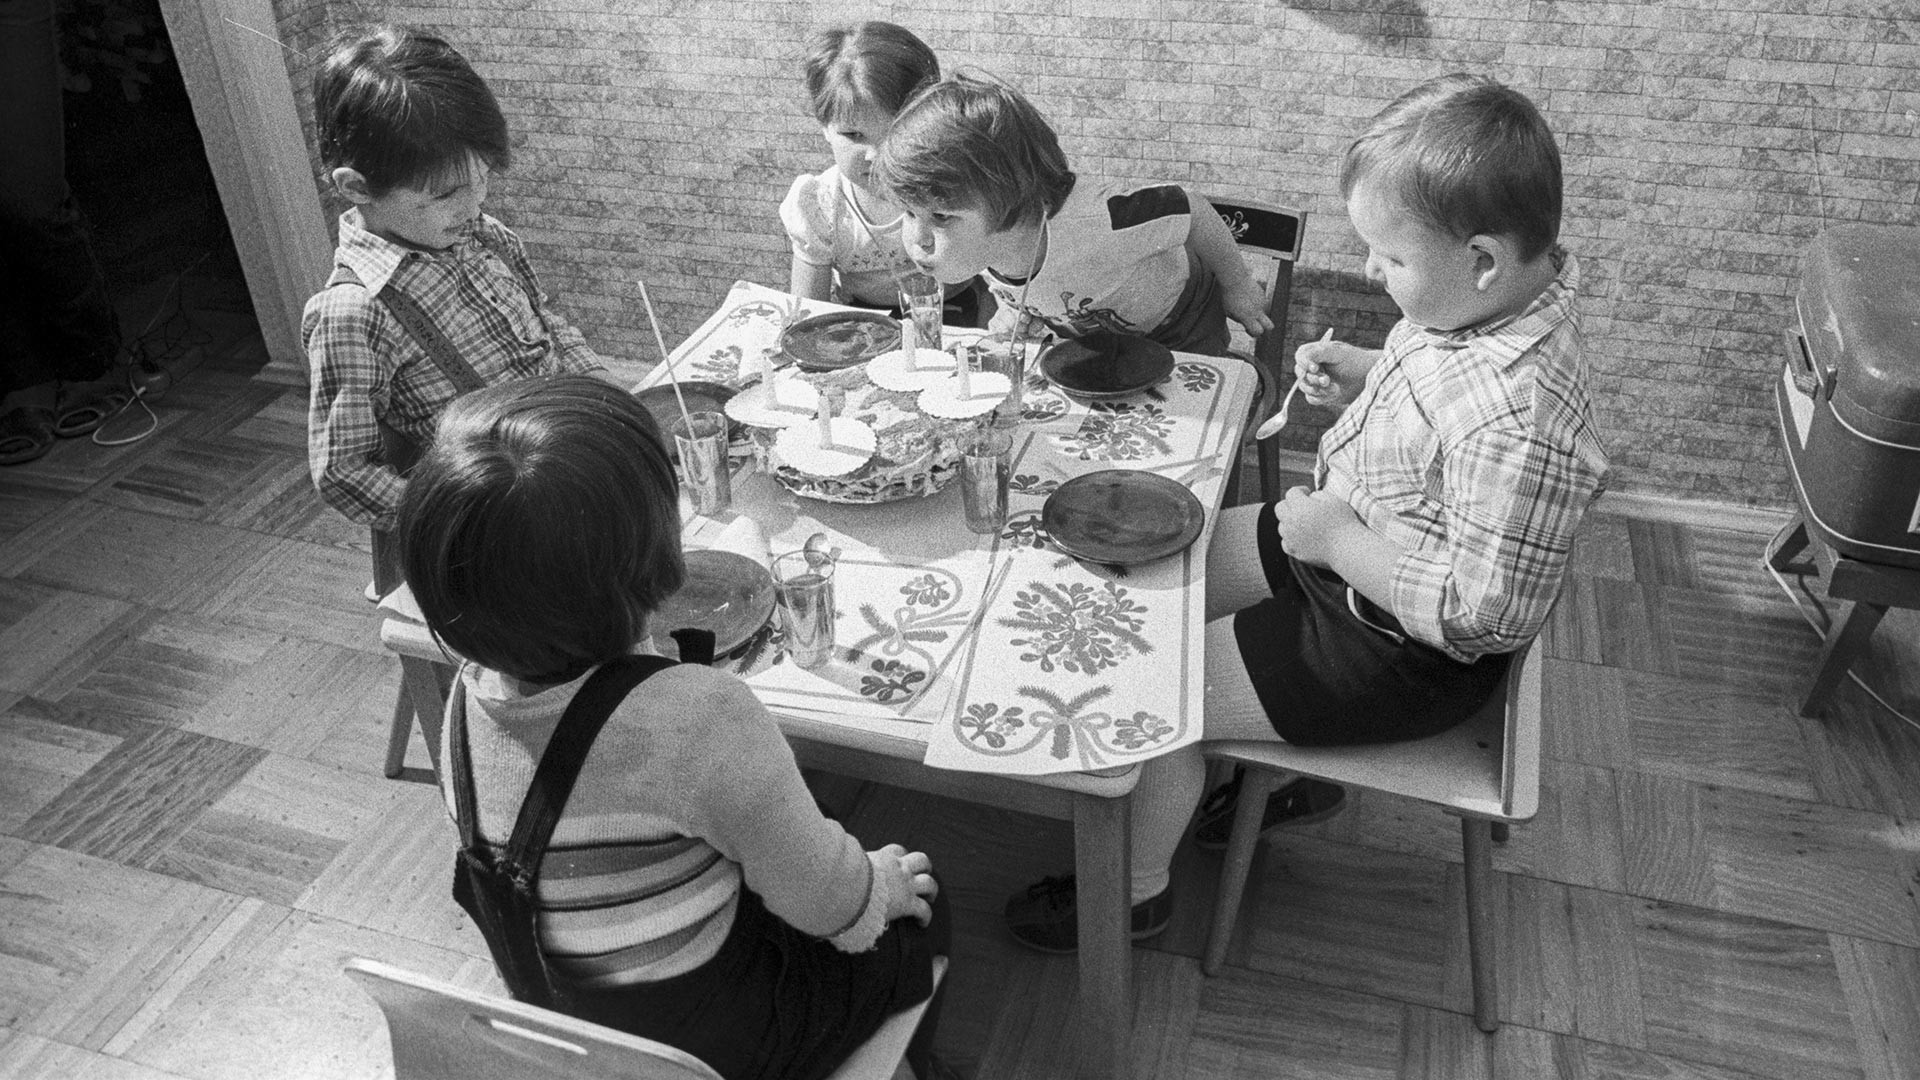 A typical child’s birthday in the USSR looked like this.